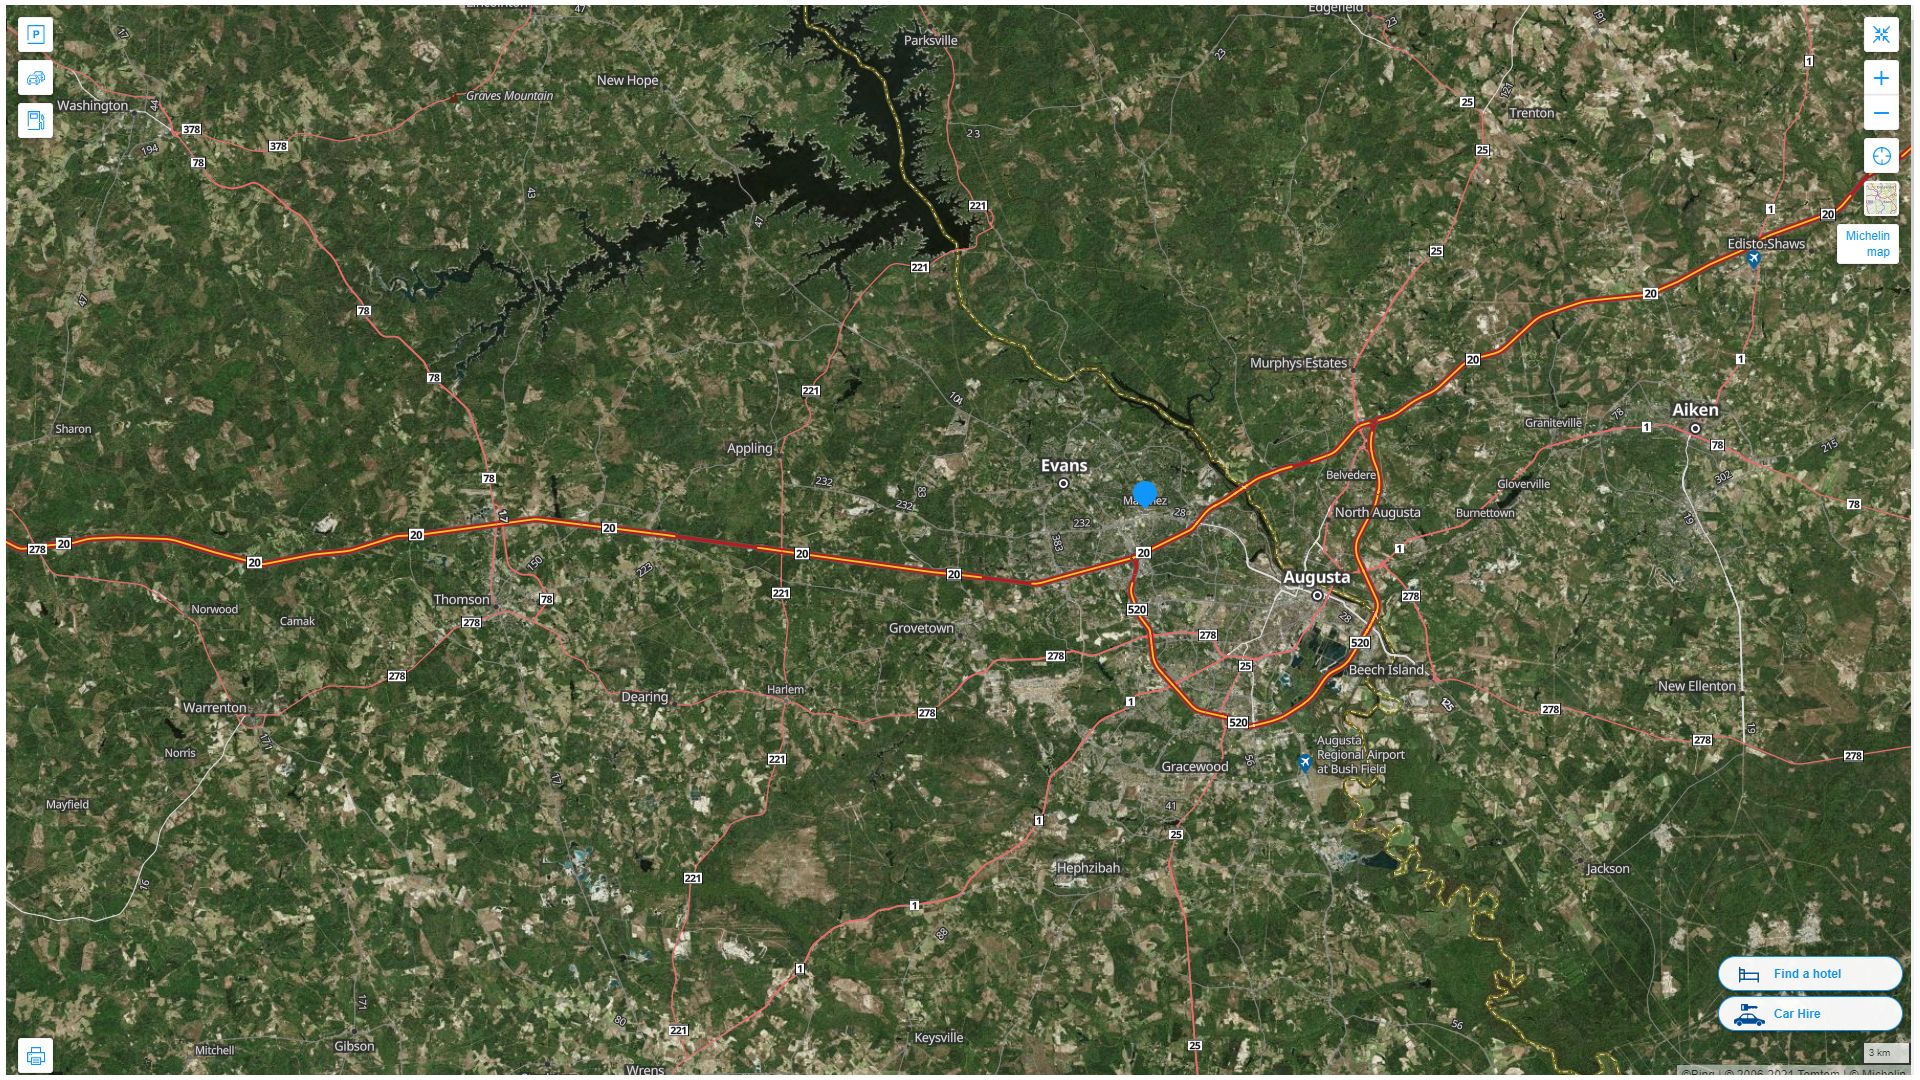 Martinez Georgia Highway and Road Map with Satellite View